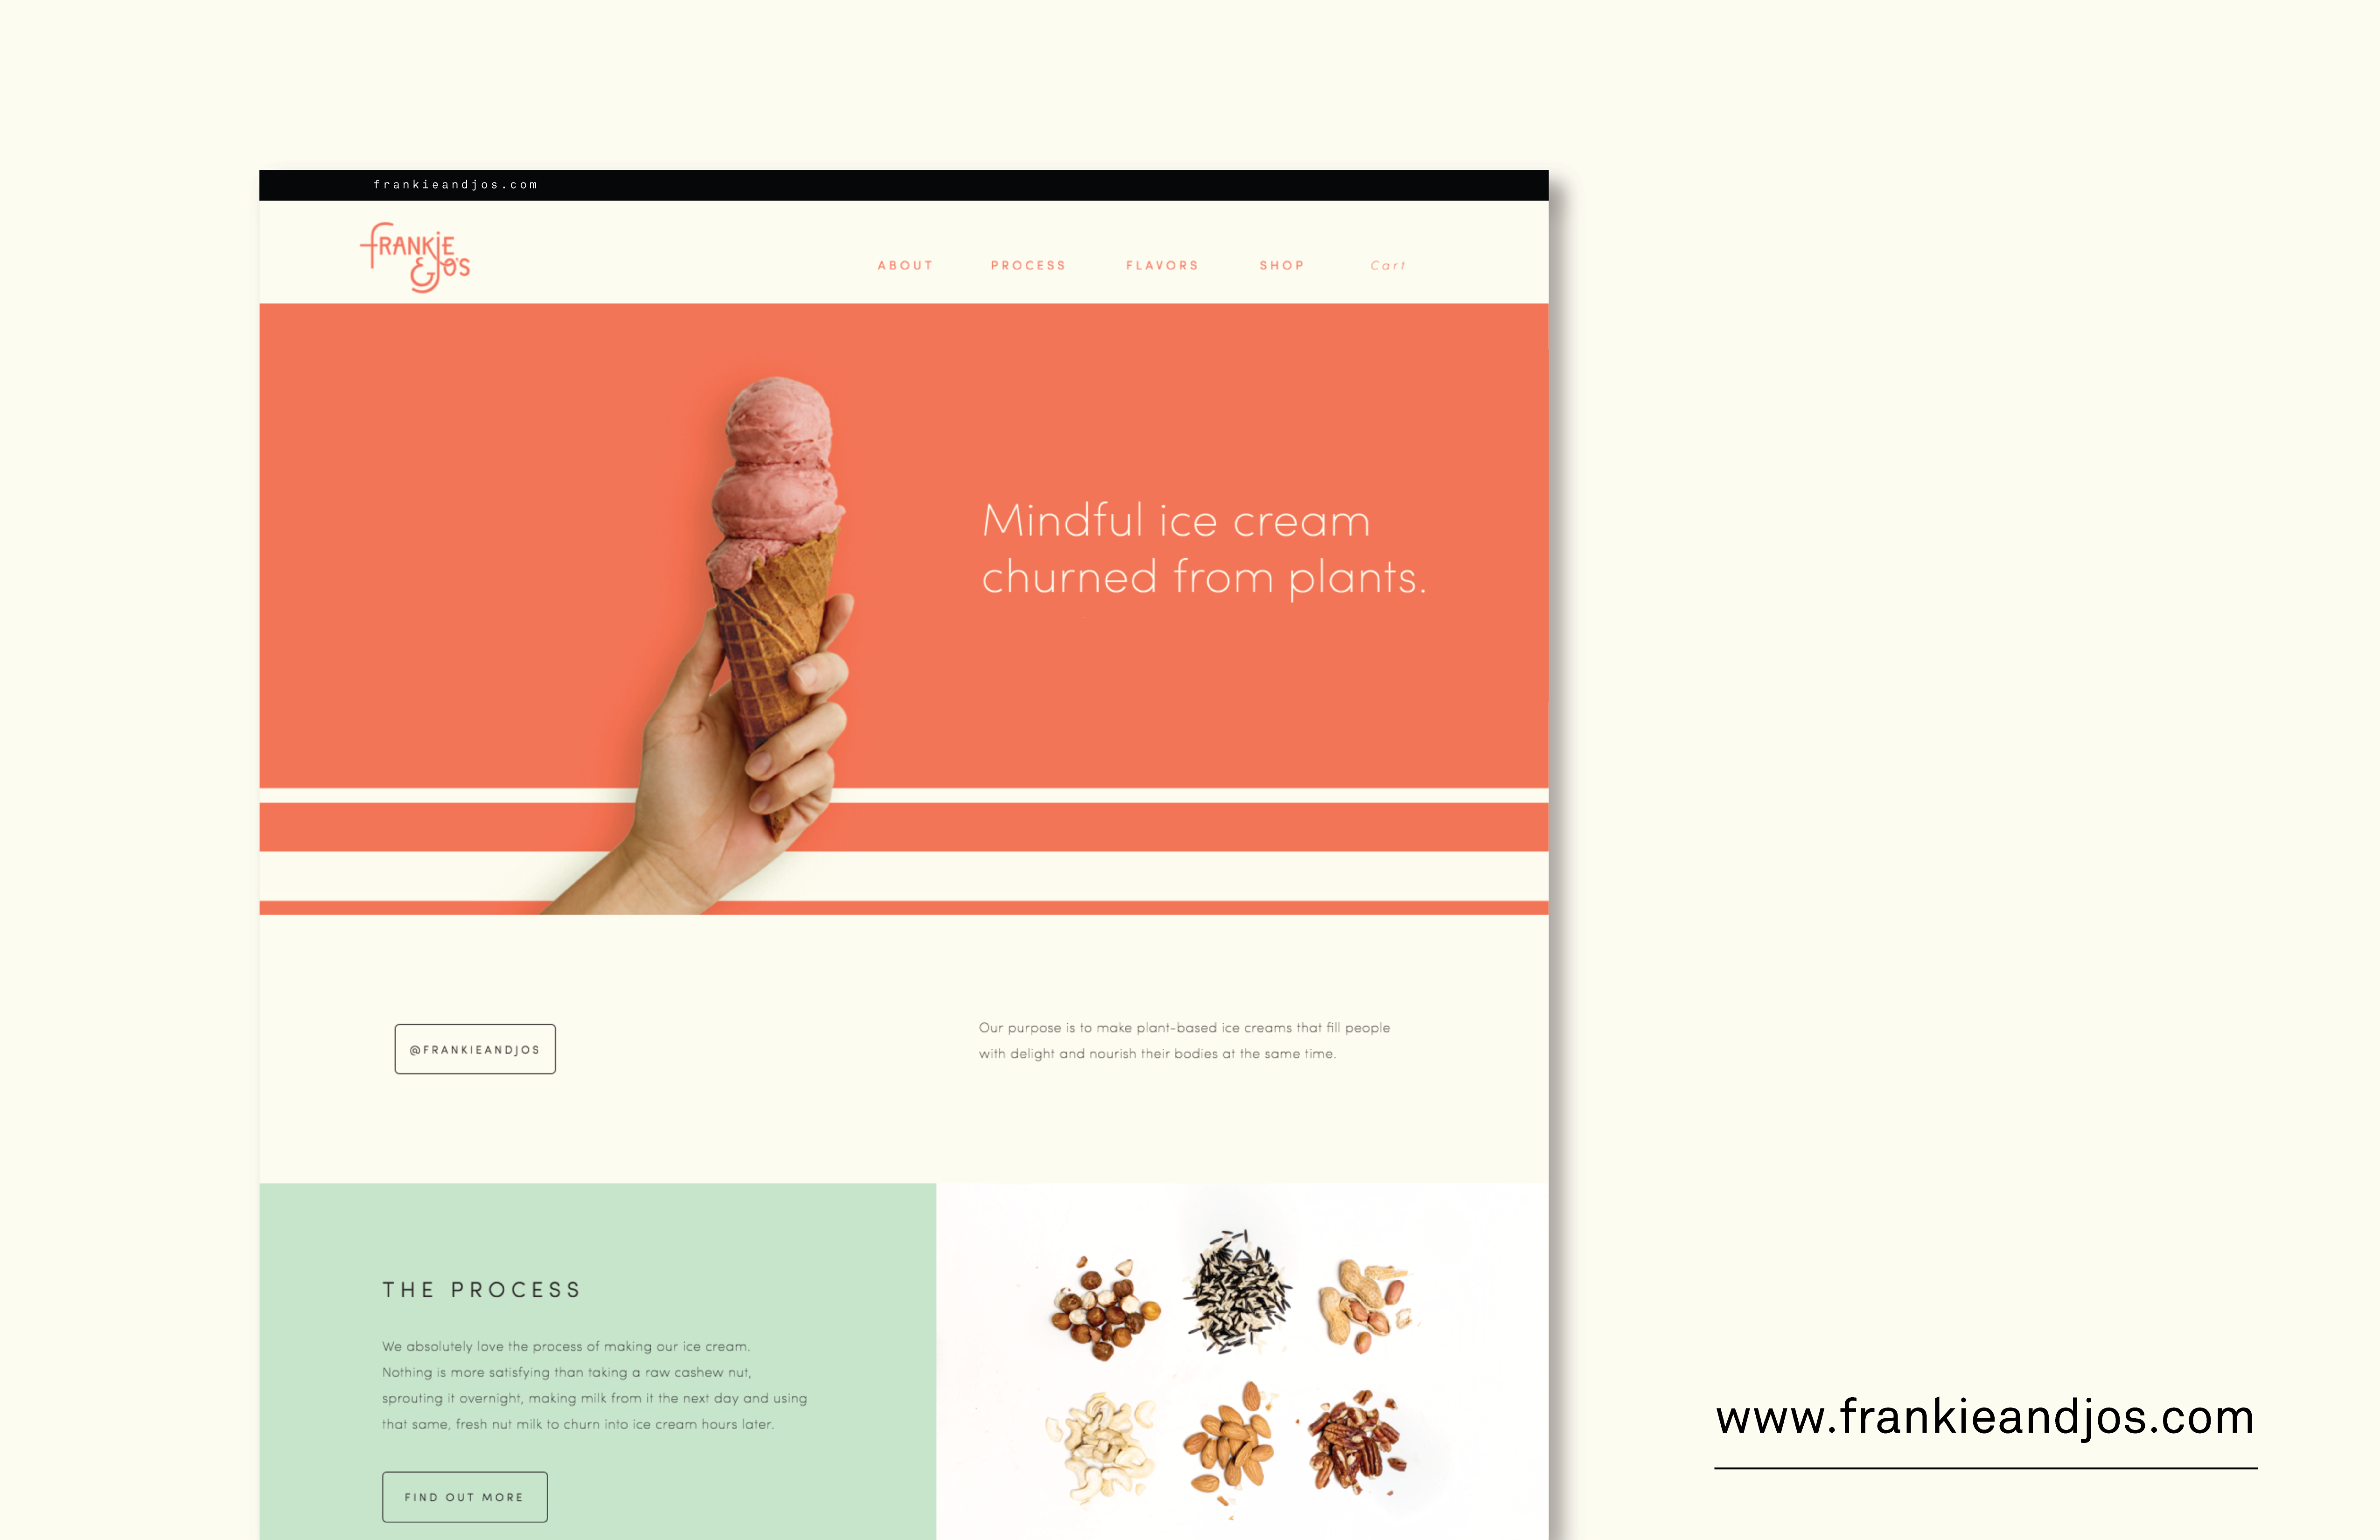 Frankie & Jo’s website reflects the idea of making mindful ice cream that uses tasty and unique fruits, vegetables, plants, and trees.